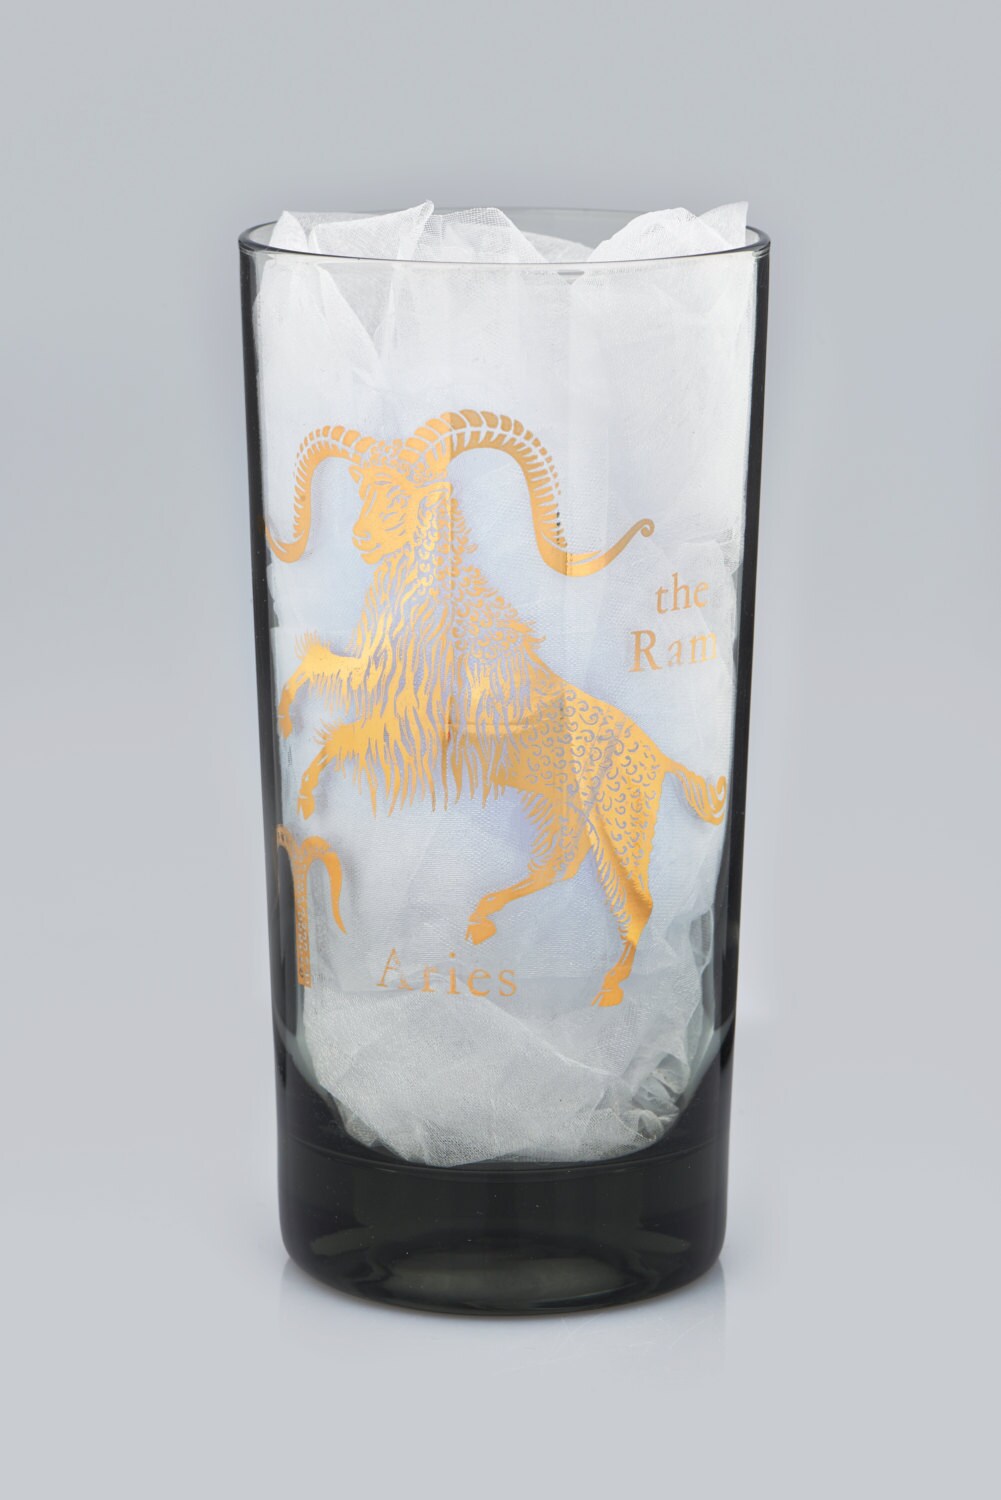 Sign/Aries The Ram Glass With Gold Font in Perfect Condition. Vintage Star/ Zodiac/Astrology/ Horoscope/